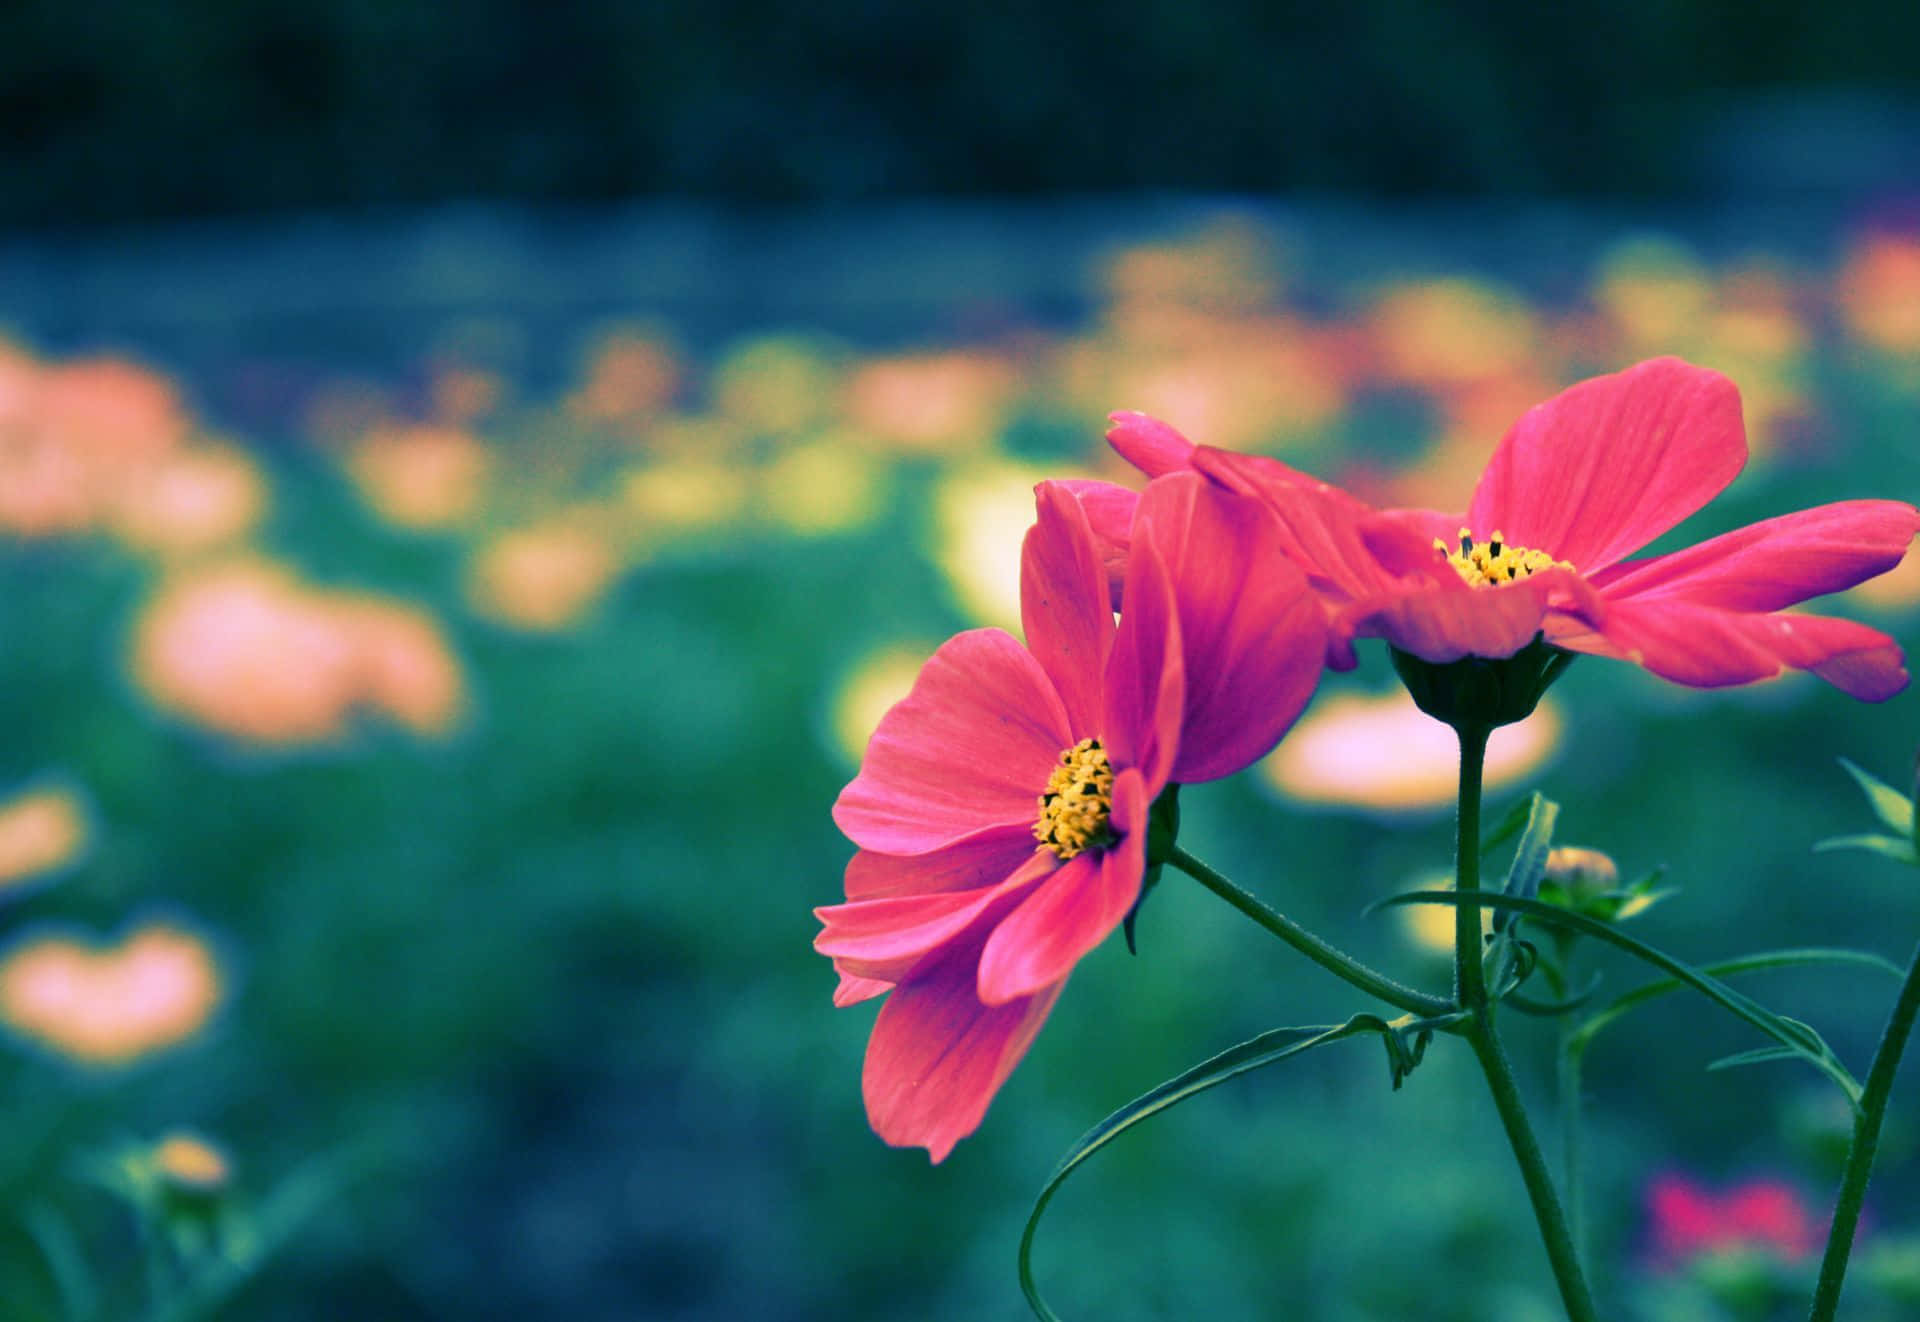 Adorable Colorful Flower Background